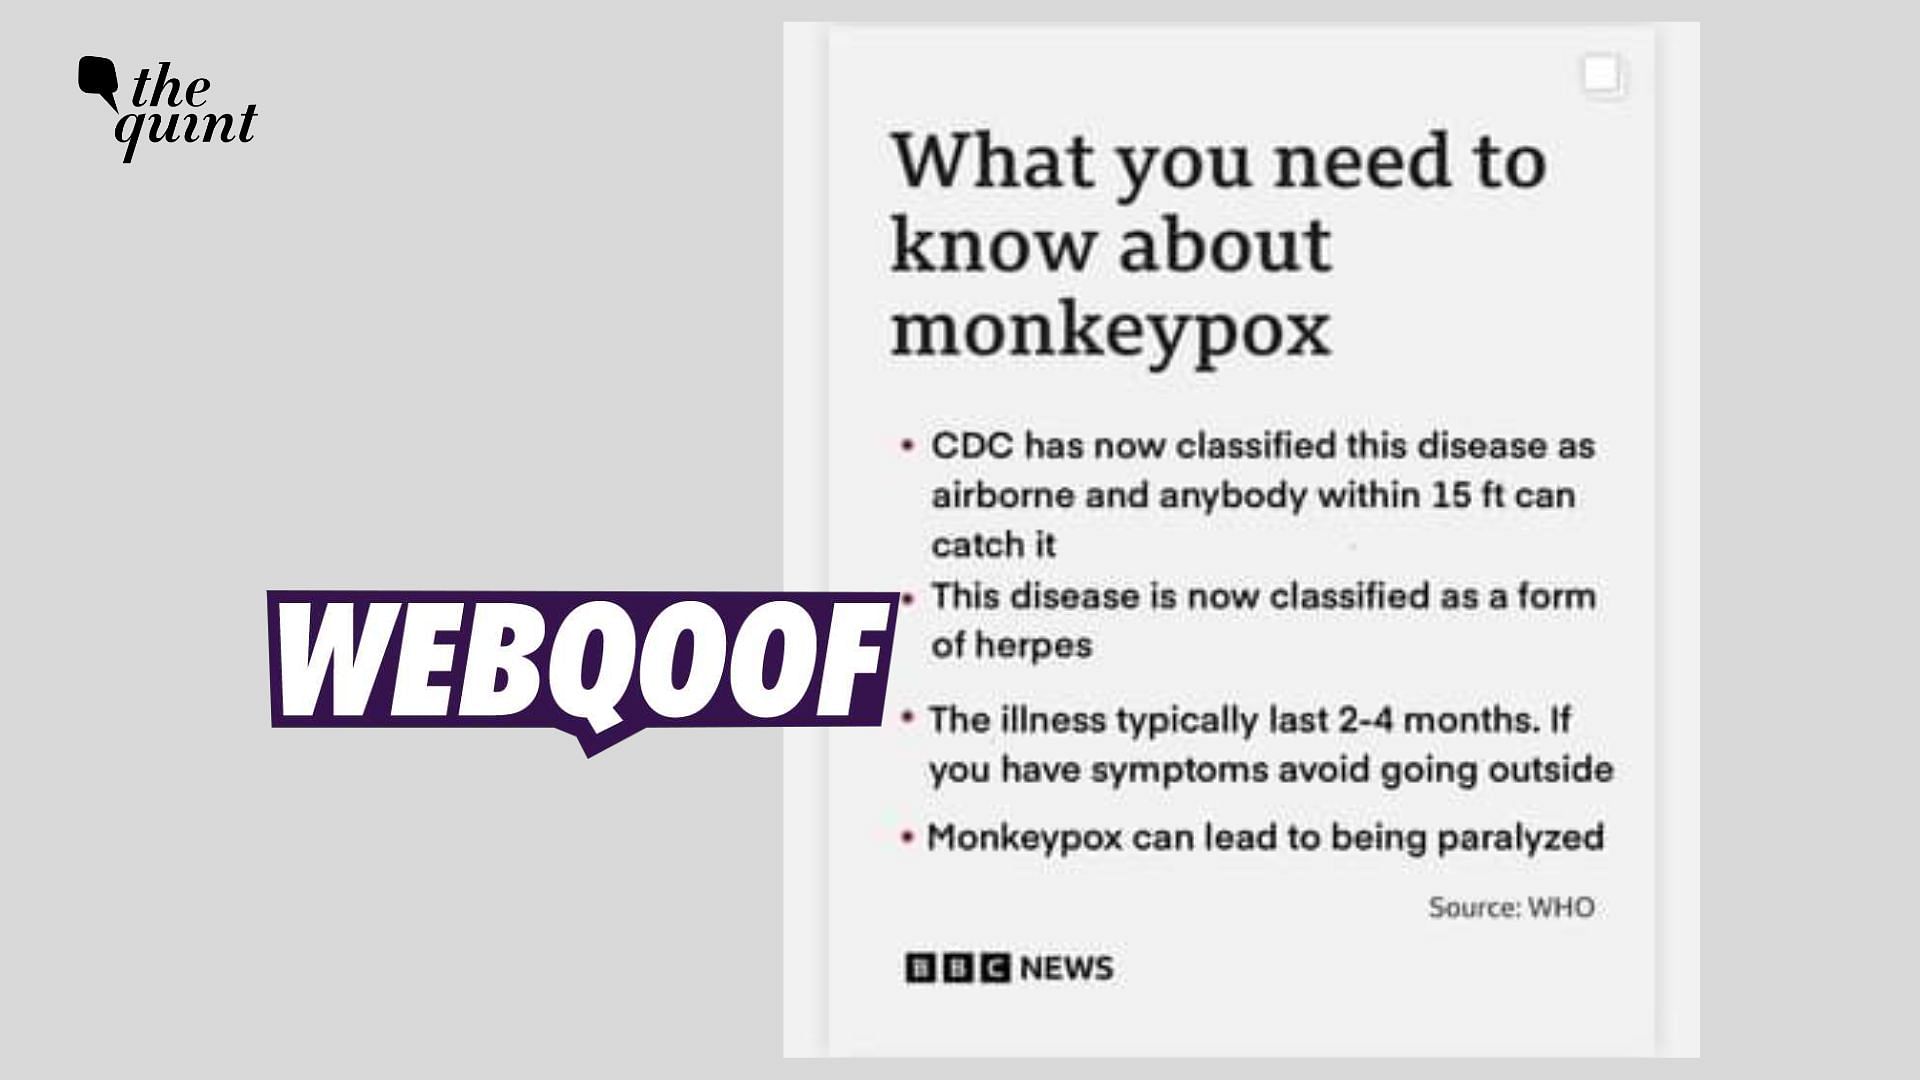 <div class="paragraphs"><p>The claim suggests that monkeypox has been classified as an airborne disease and can lead to paralysis.&nbsp;</p></div>